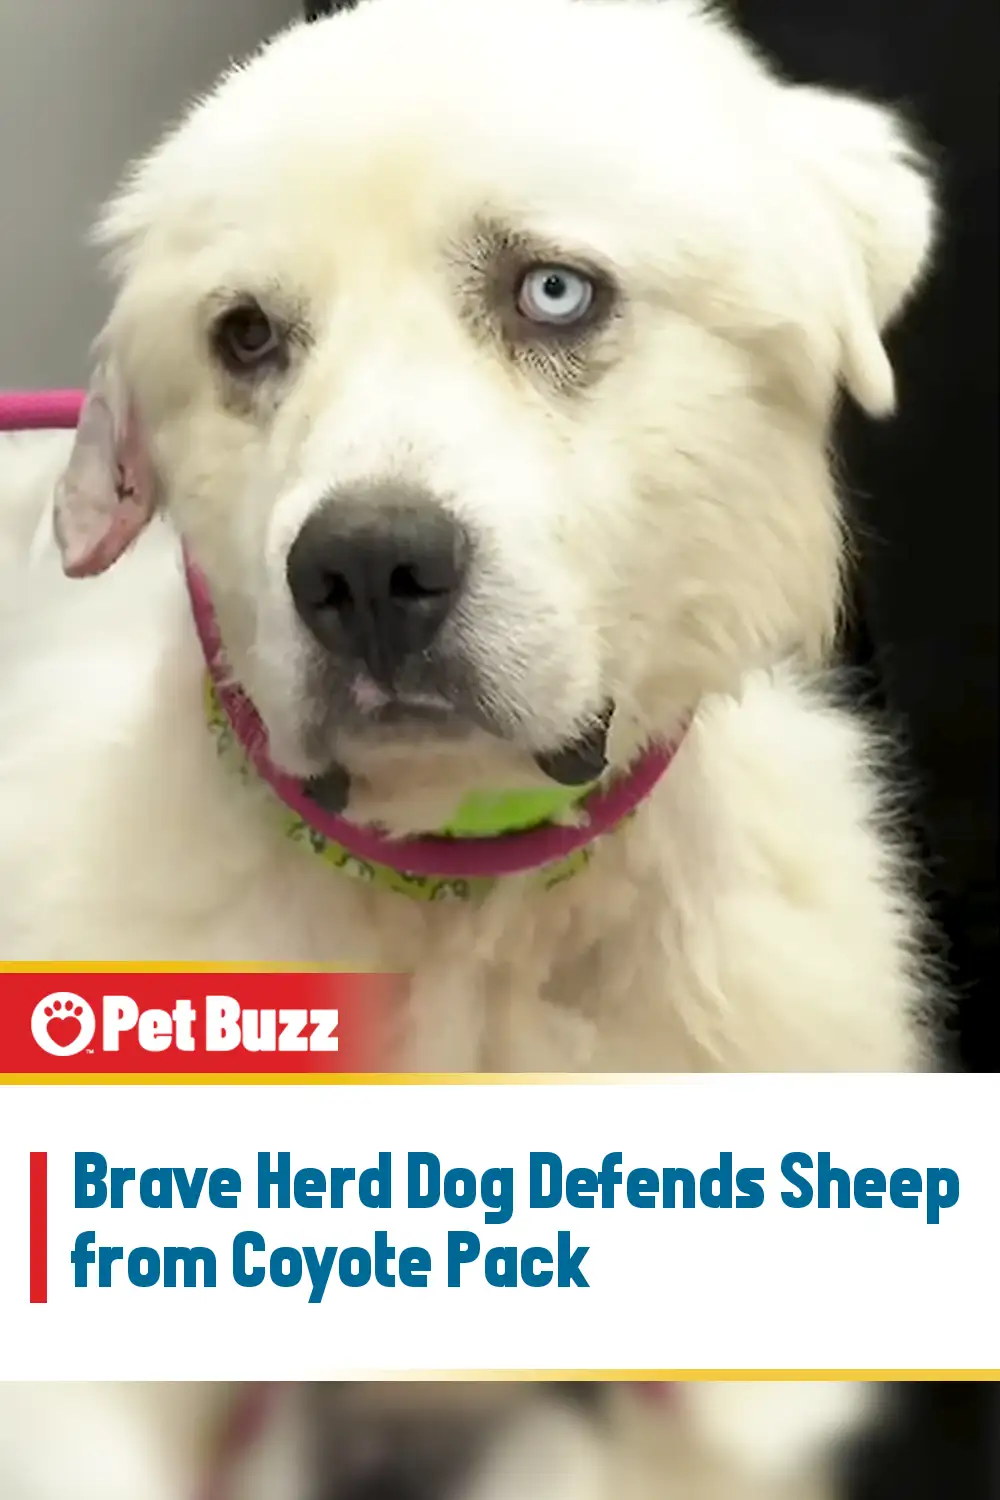 Brave Herd Dog Defends Sheep from Coyote Pack